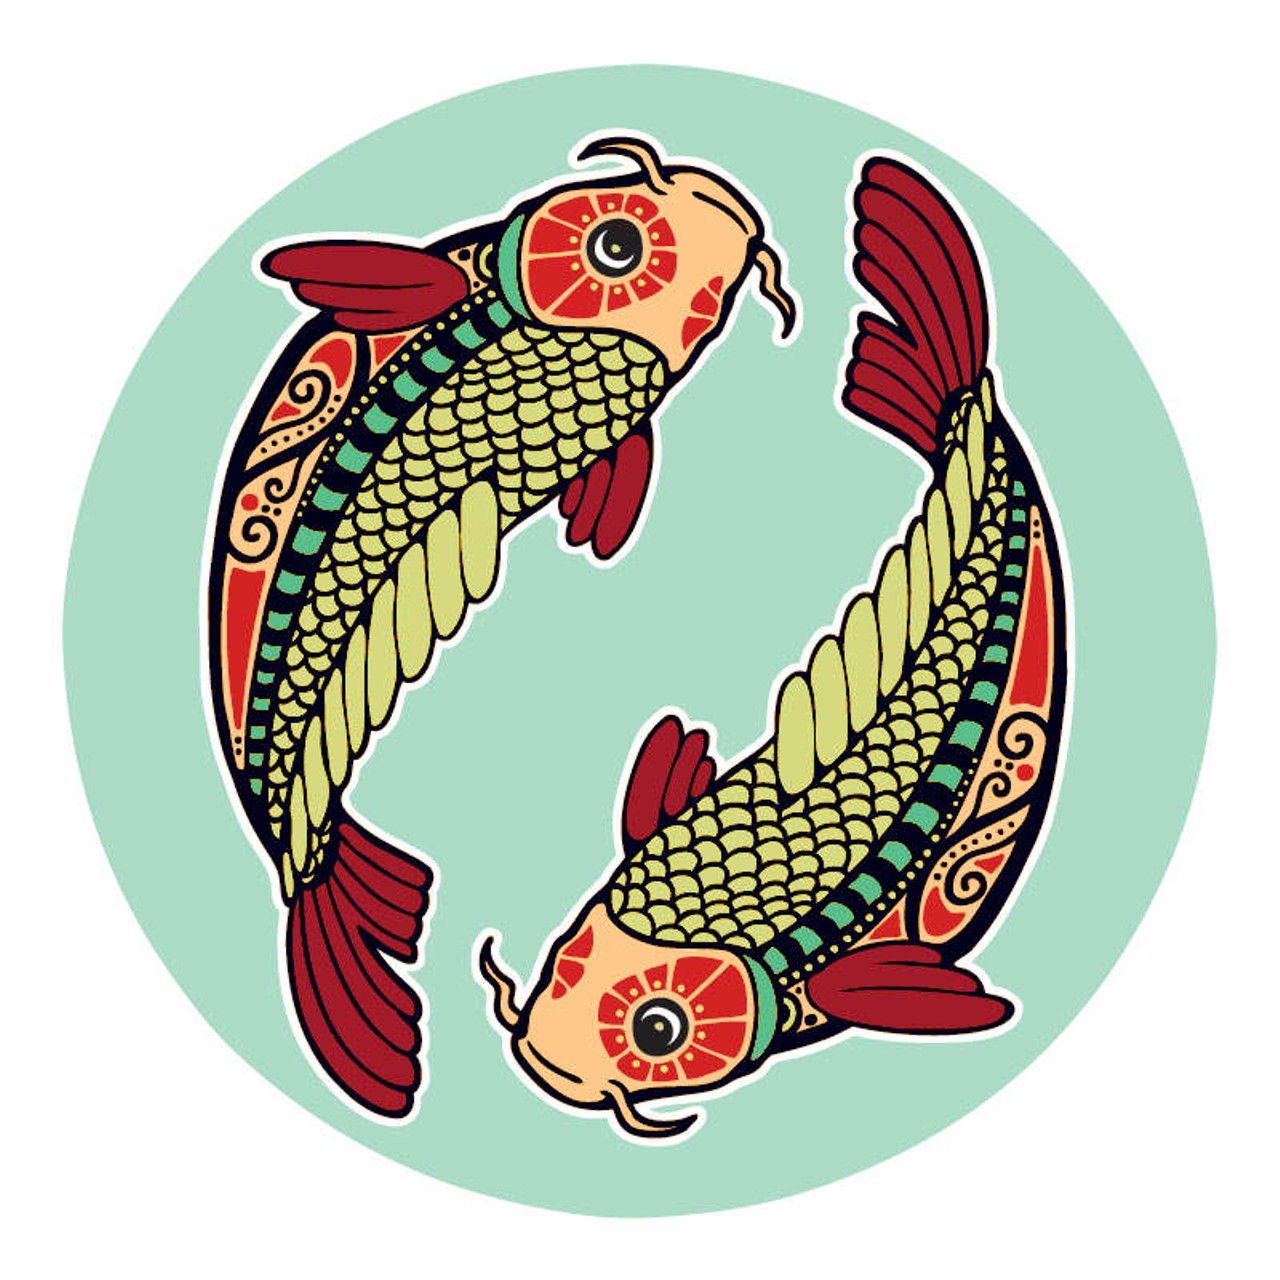 PISCES: February 21 &#150; March 20
You keep getting strung up by experiences that make it seem as if you have no control. There are fears of one kind or another that keep you awake at night. Your anxiety is there to remind you that it's time to find your way back to center. Only from that place will you be able to manage what look to be multiple pressures at a huge turning point. This is where the miraculous piece just might kick in. Breathe deep. Nothing is ever what it appears to be. The universe is malleable in situations like this. Keep your heart and your mind focused on whatever it takes to turn things around.